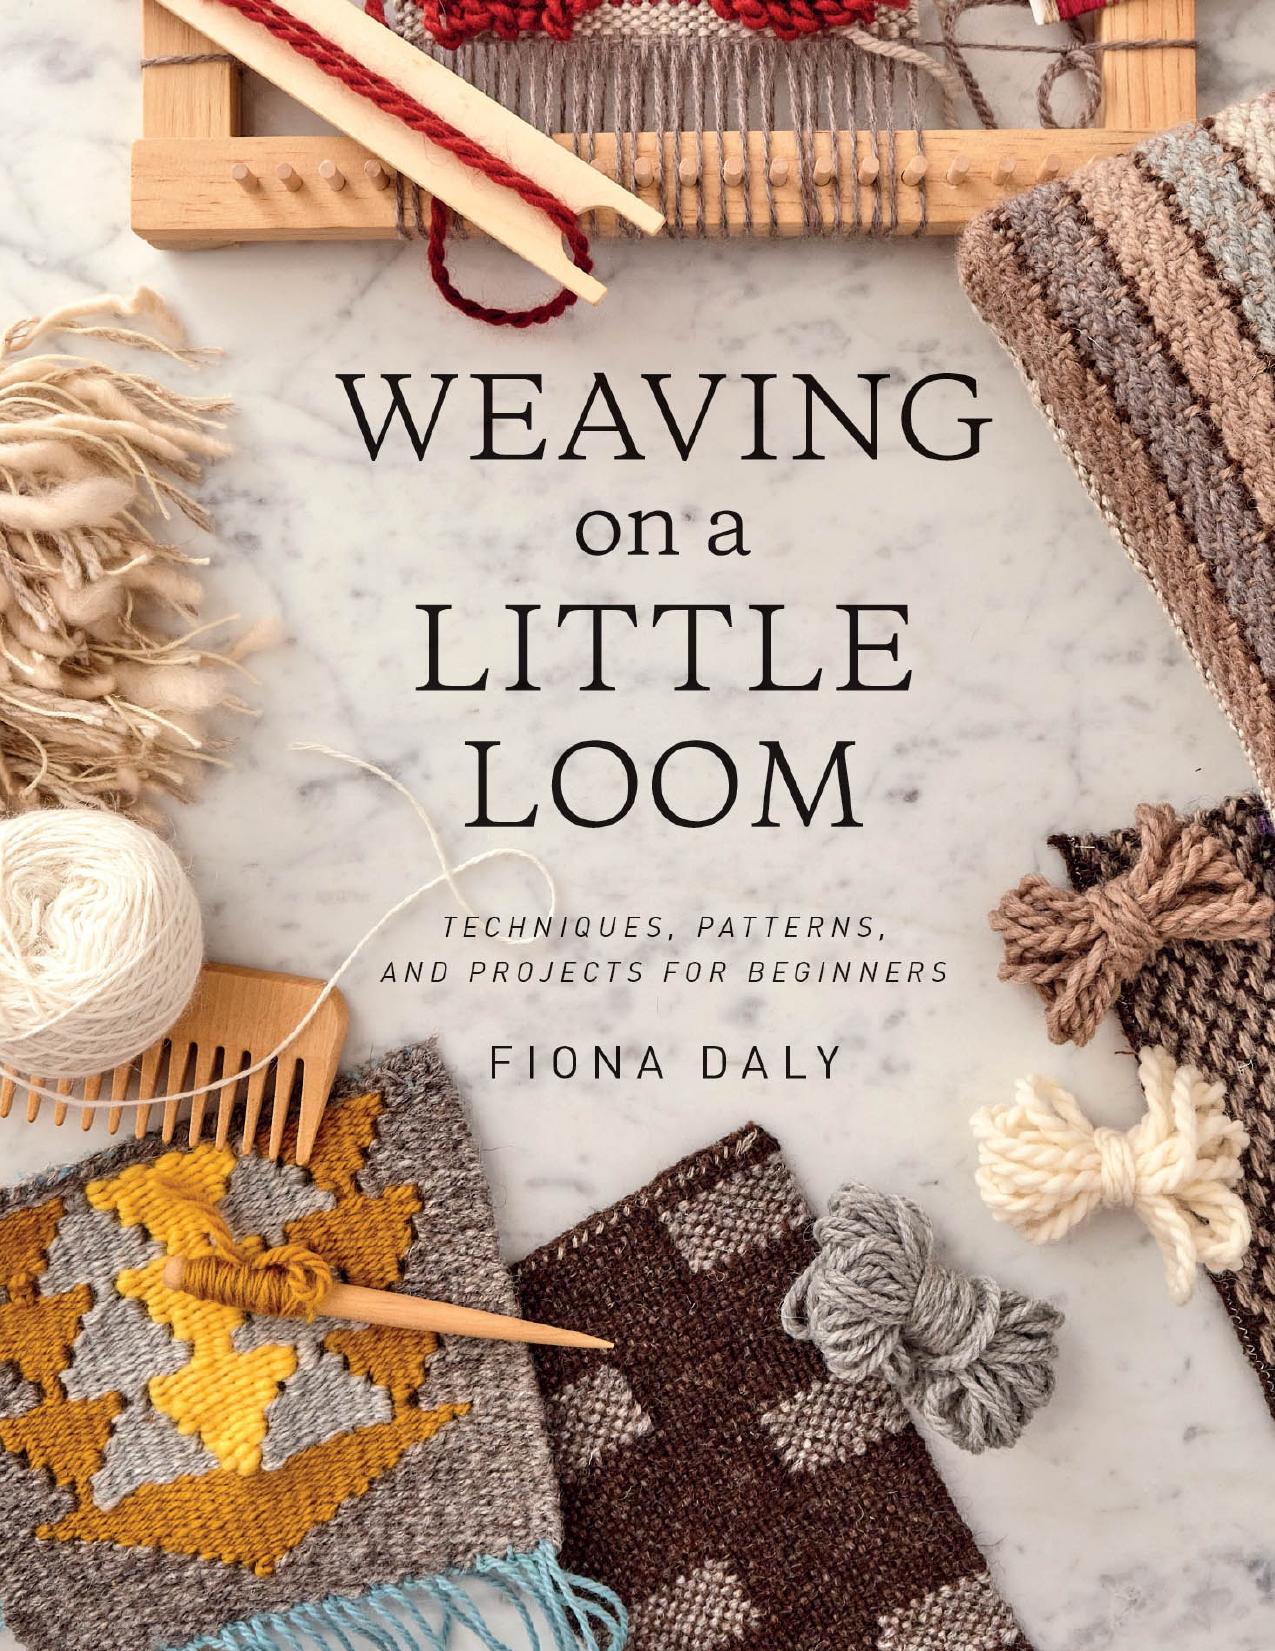 Weaving on a Little Loom: Techniques, Patterns, and Projects for Beginners - PDFDrive.com